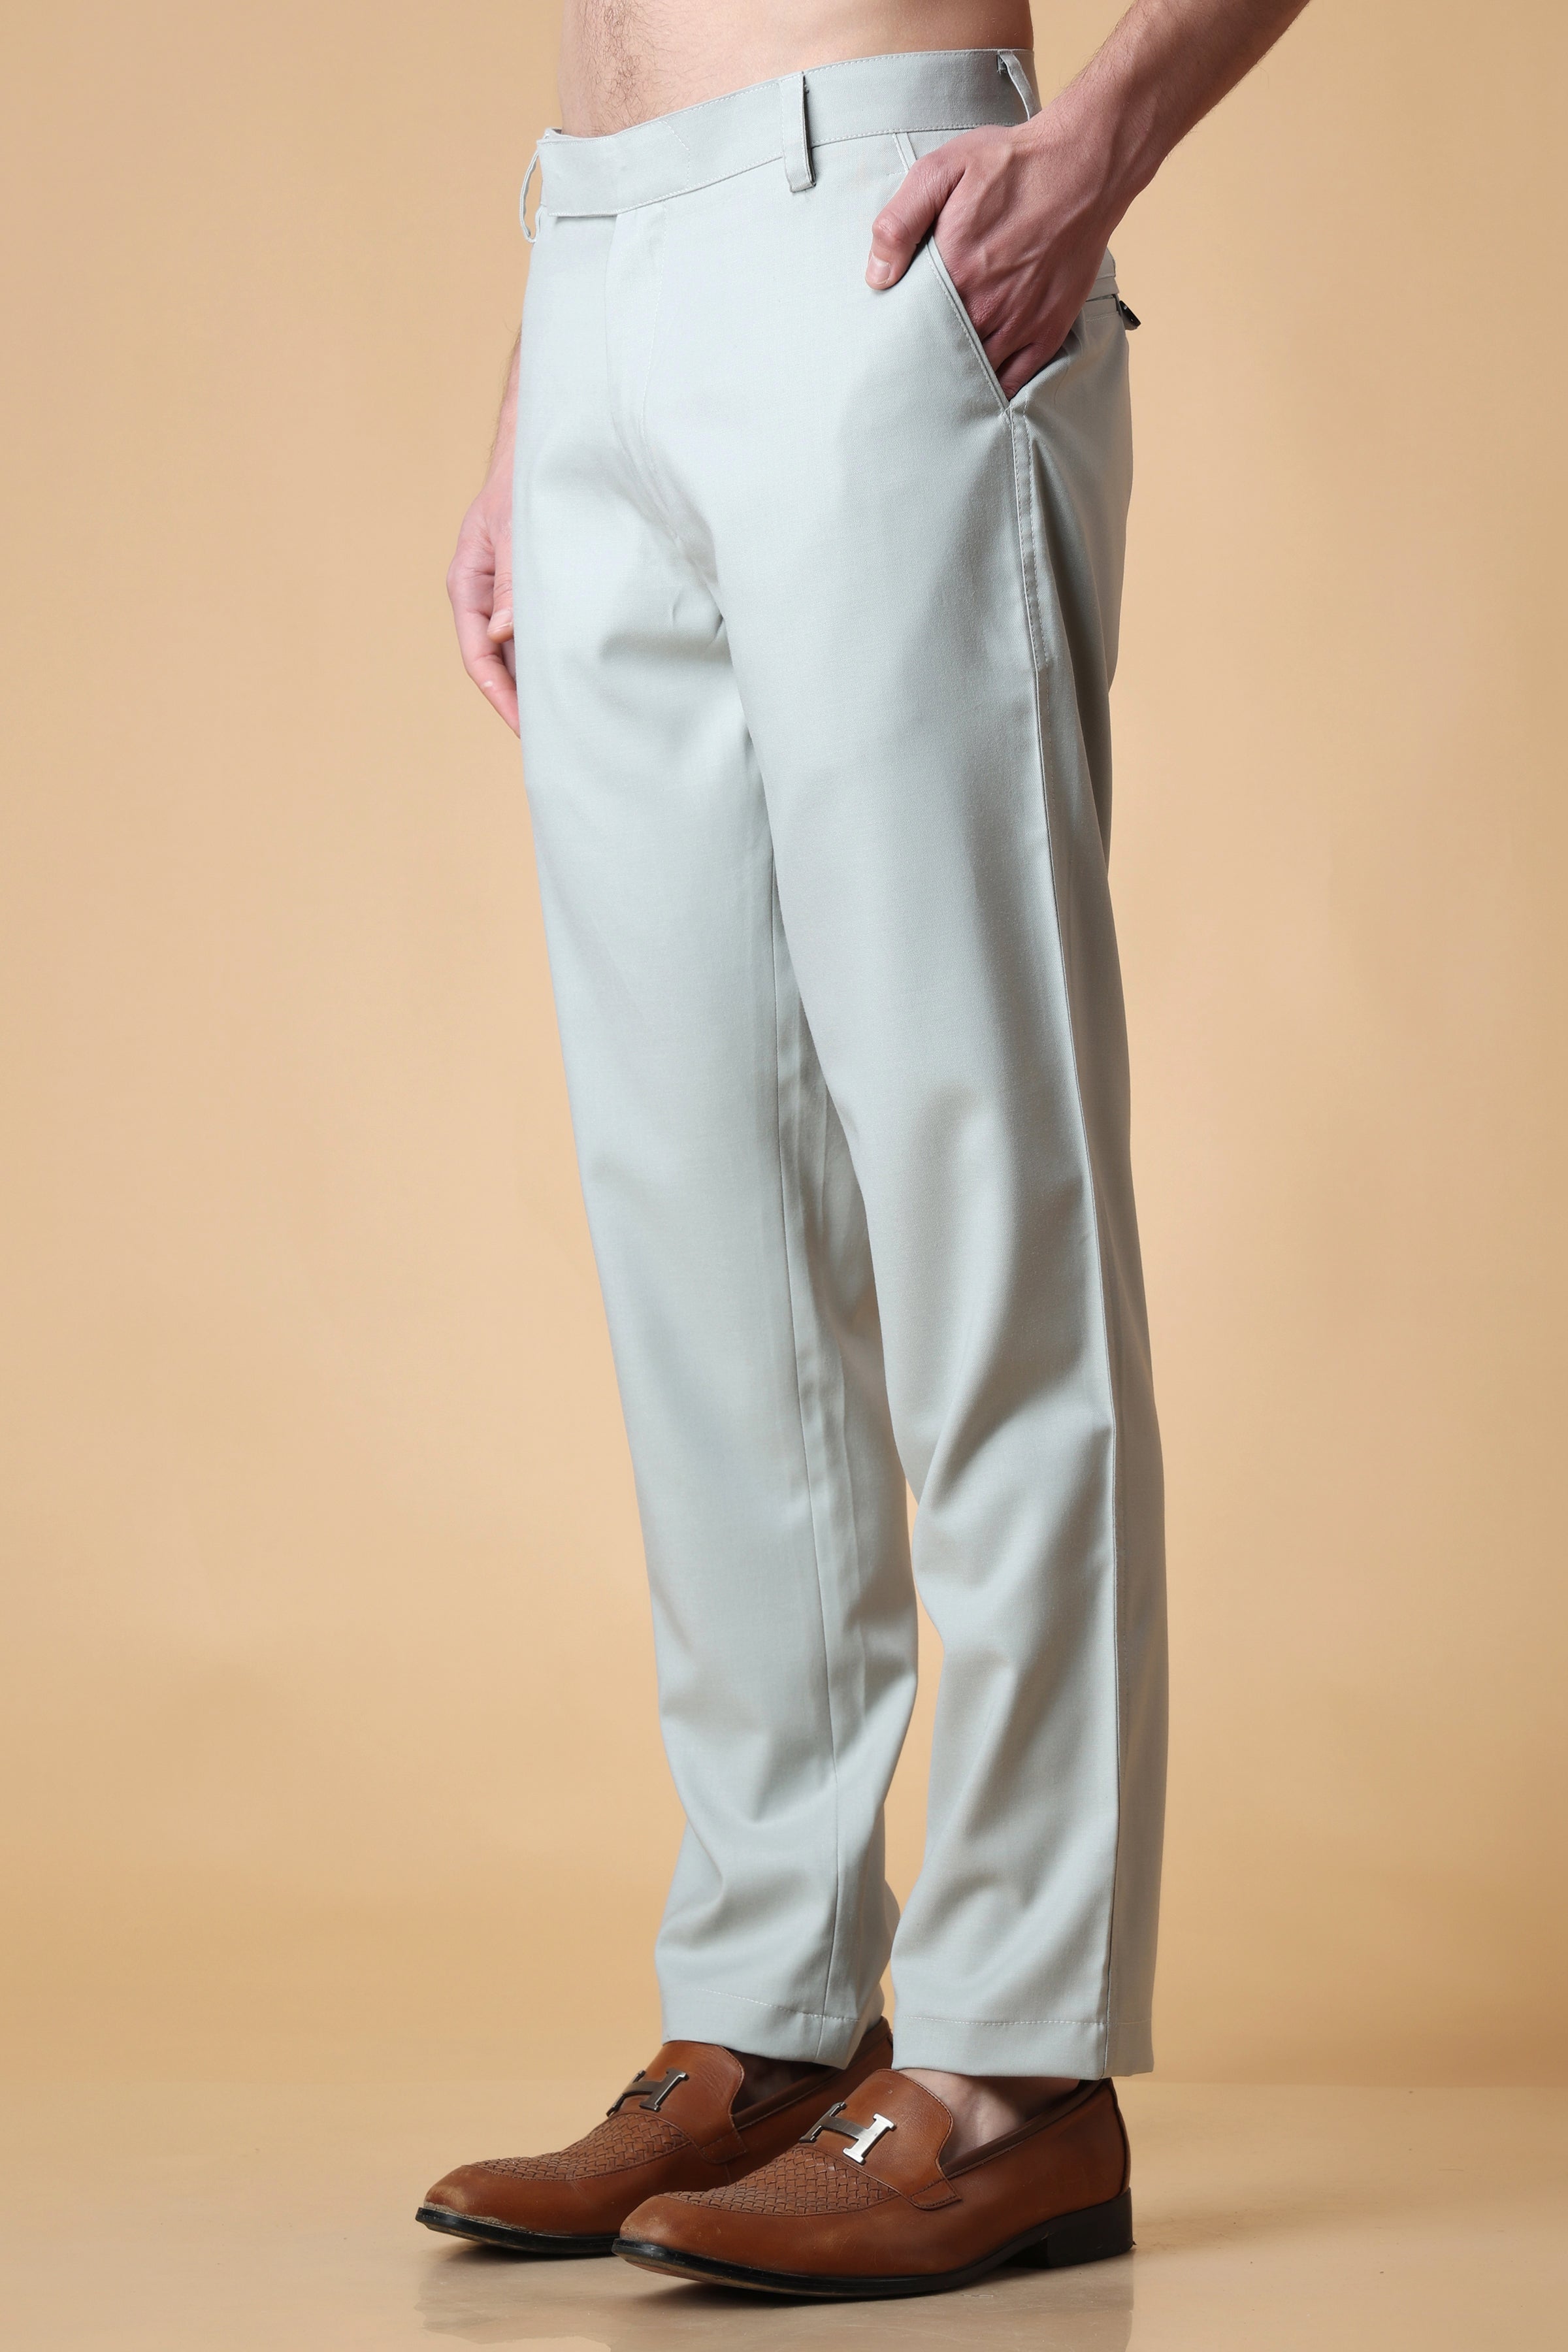 Grey Stretchable Formal Pants  Formaloutfit